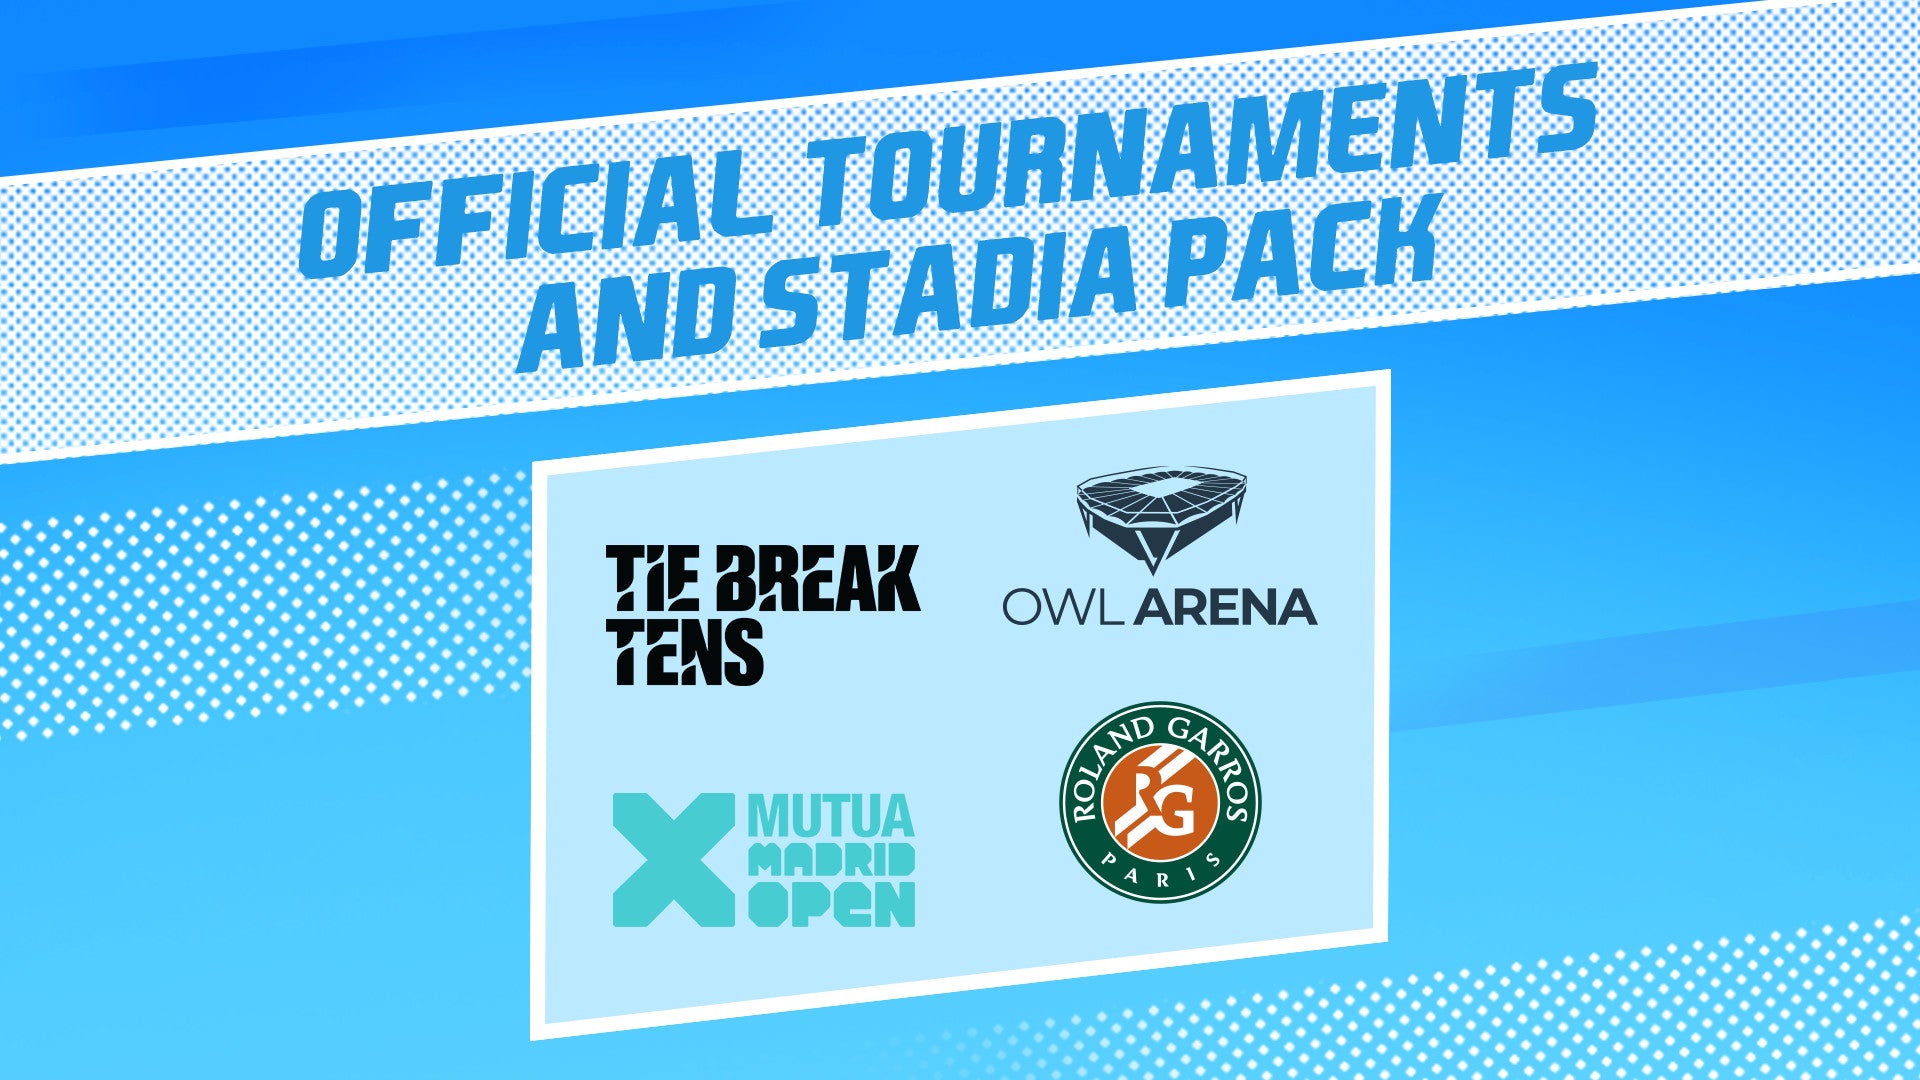 Tennis World Tour 2 Official Tournaments and Stadia Pack DLC